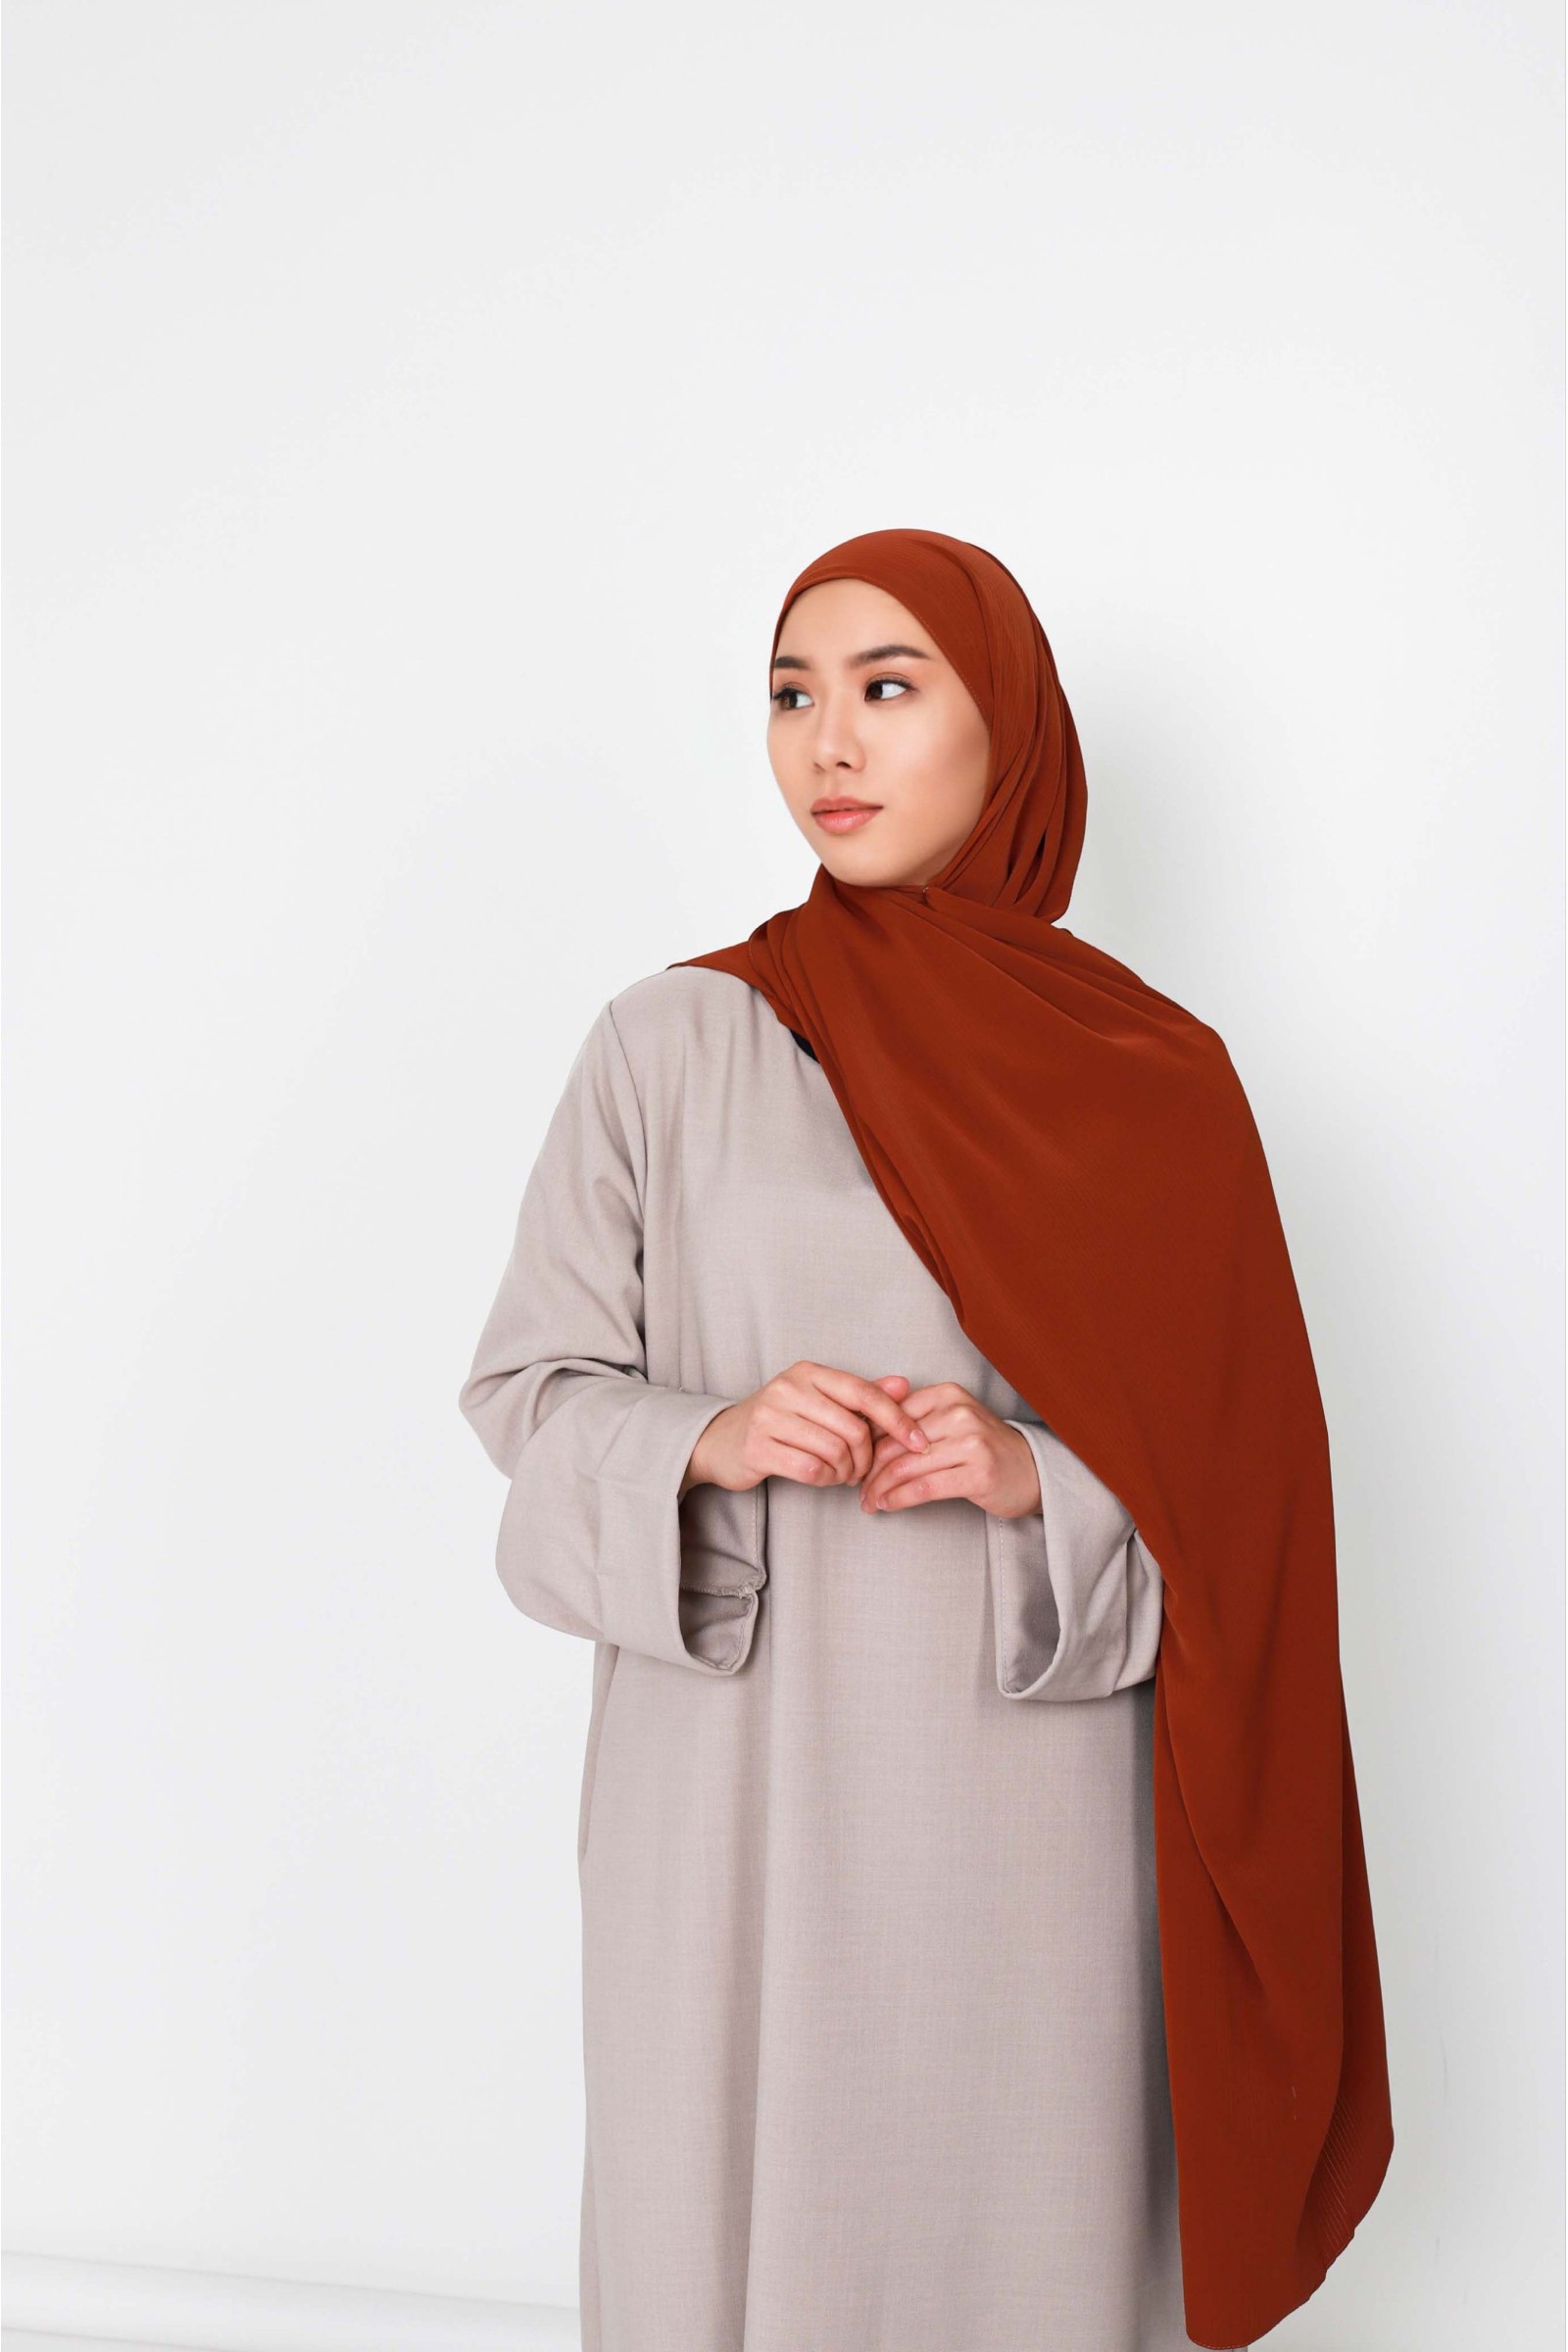 Scarf easy to put on without clip ideal for Muslim women